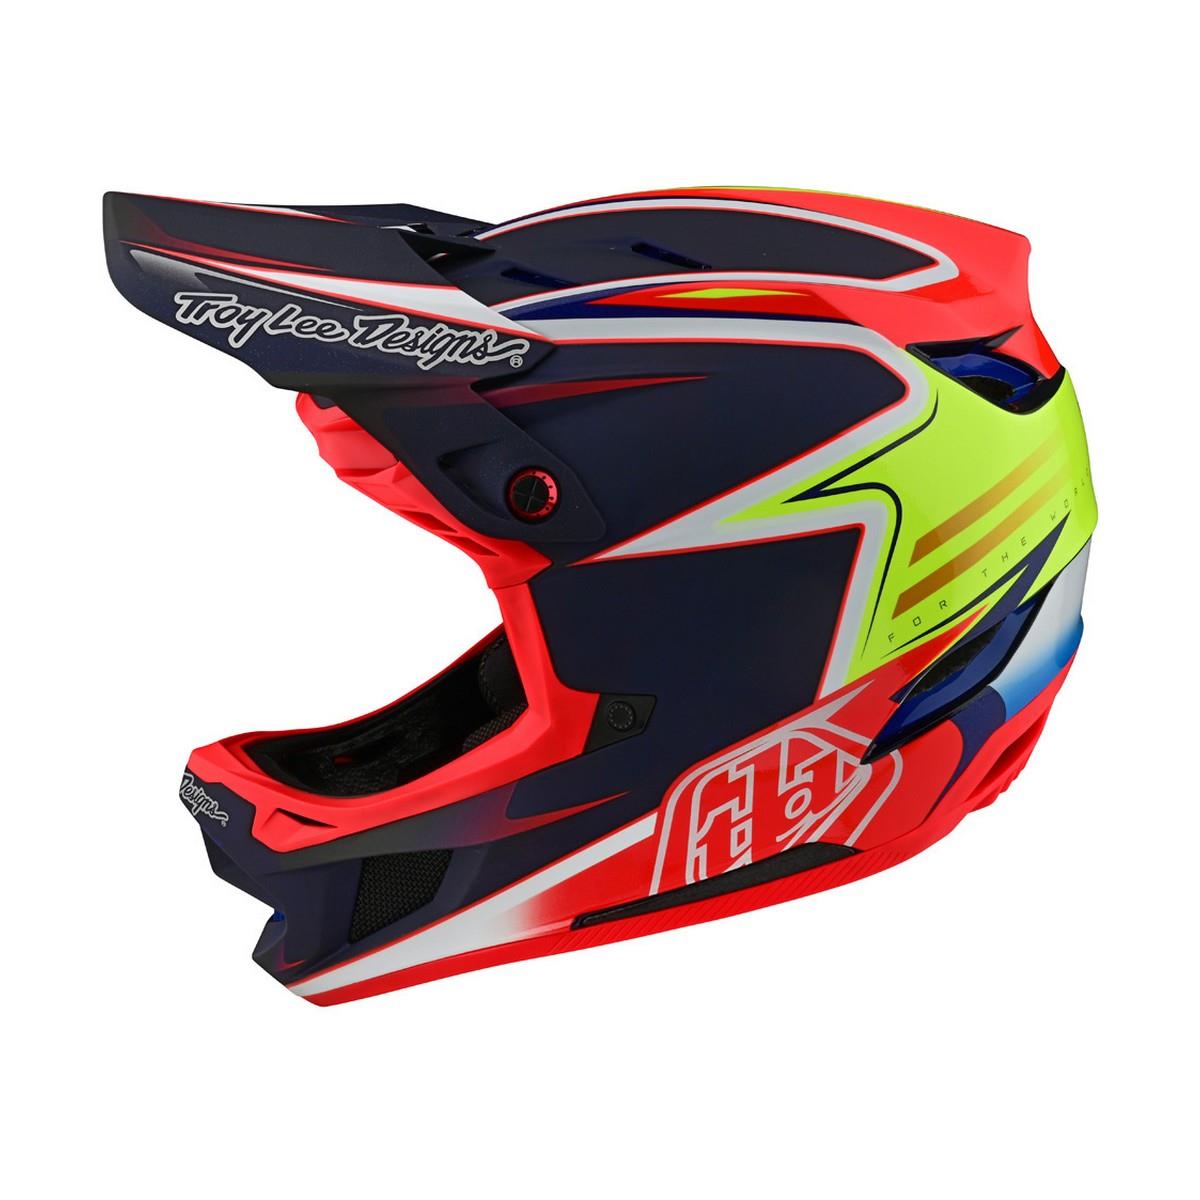 Full Face MTB Helmet D4 MIPS TeXtreme Carbon Stealth Black/Red Size S (55-56cm)